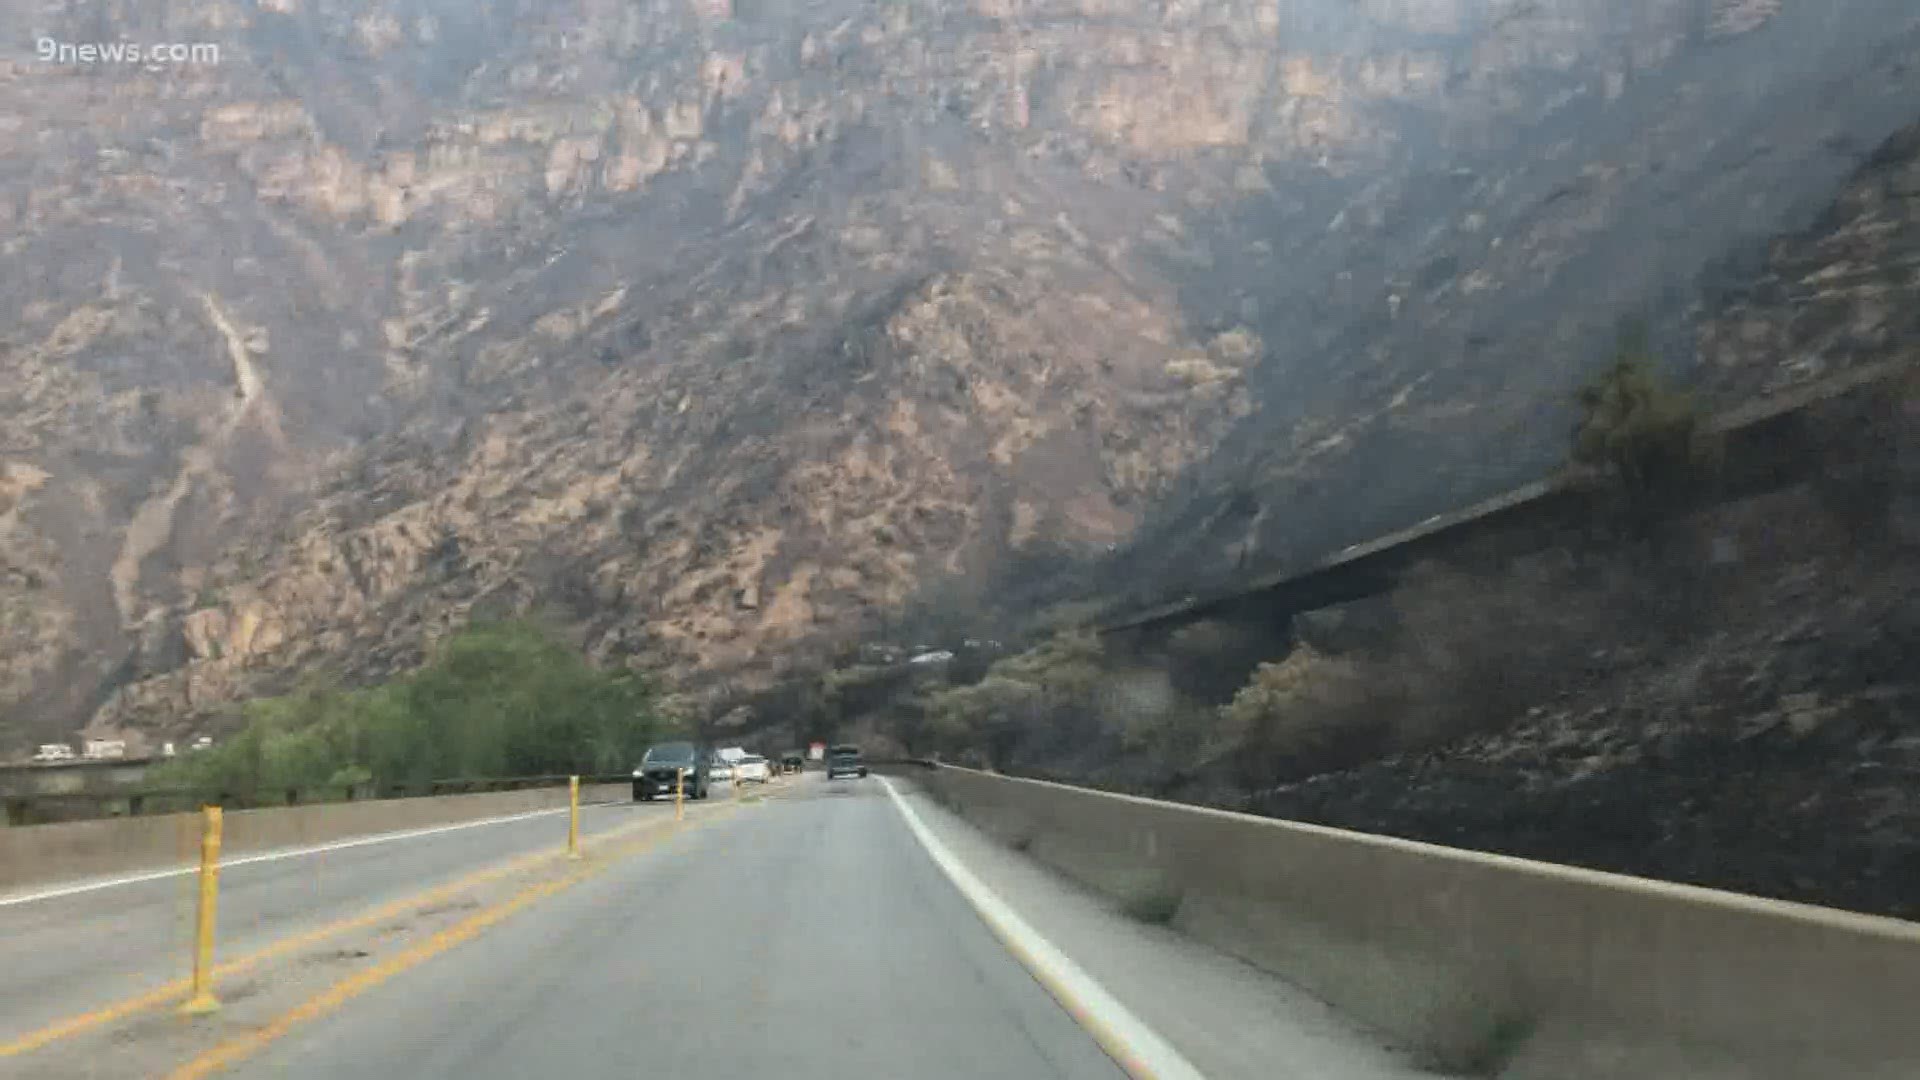 The fire burned more than 32,000 acres and blackened steep hillsides beside I-70. CDOT has plans to install new protective fencing in the fall.